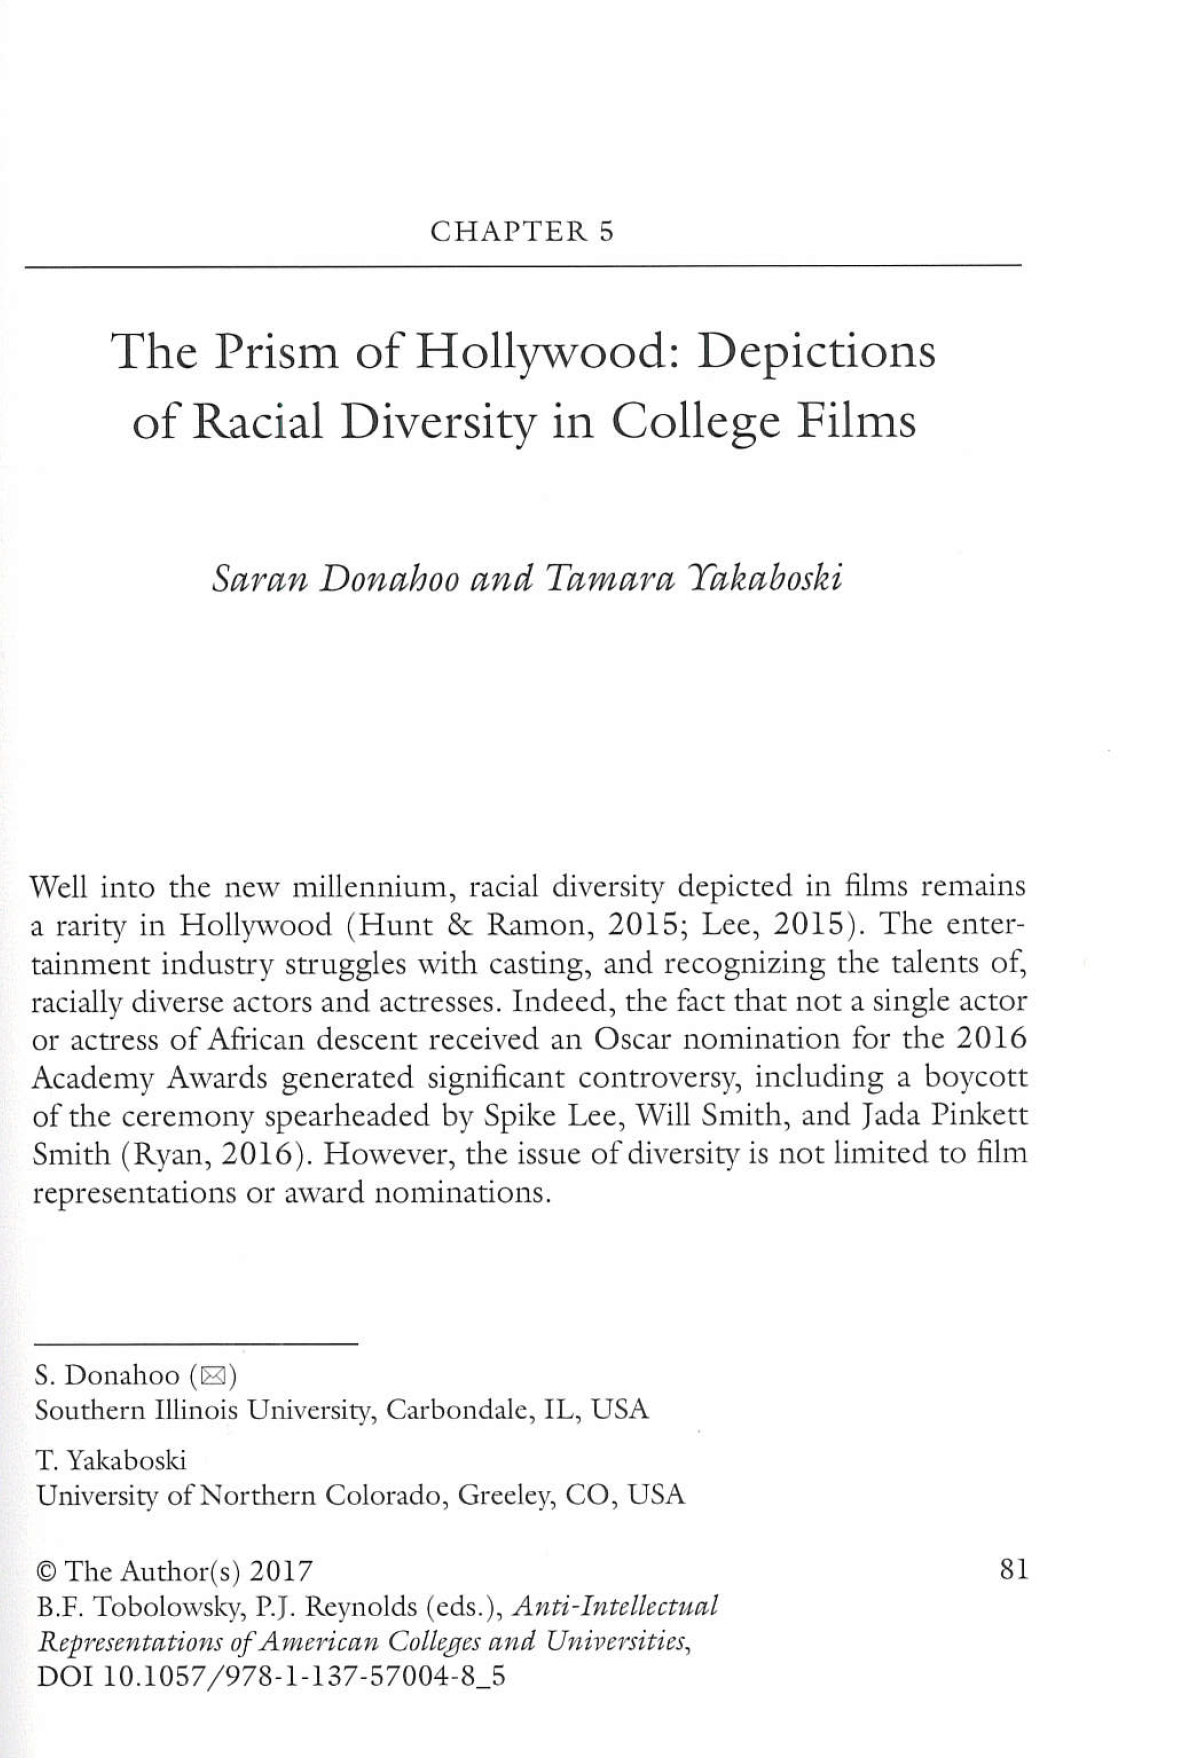 The prism of Hollywood: Depictions of racial diversity in college films